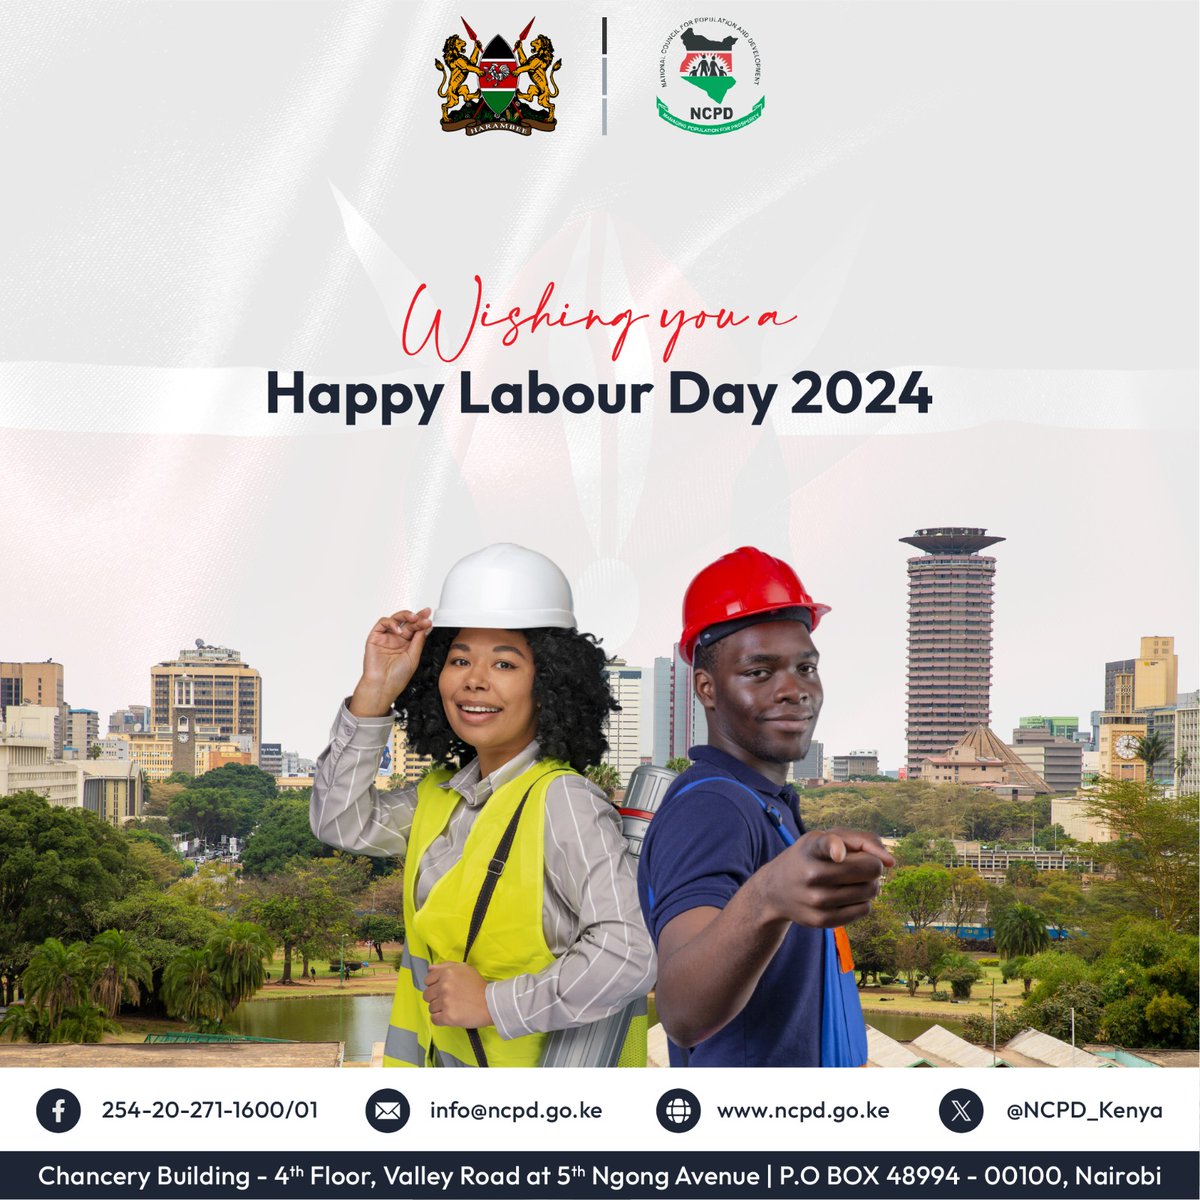 The @NCPD_Kenya Board of Directors, DG @DrAbeySheikh , the Senior Management and all Staff Wishes you all a Happy Labour Day We celebrate your hard work and commitment towards a better society. #LabourDay2024